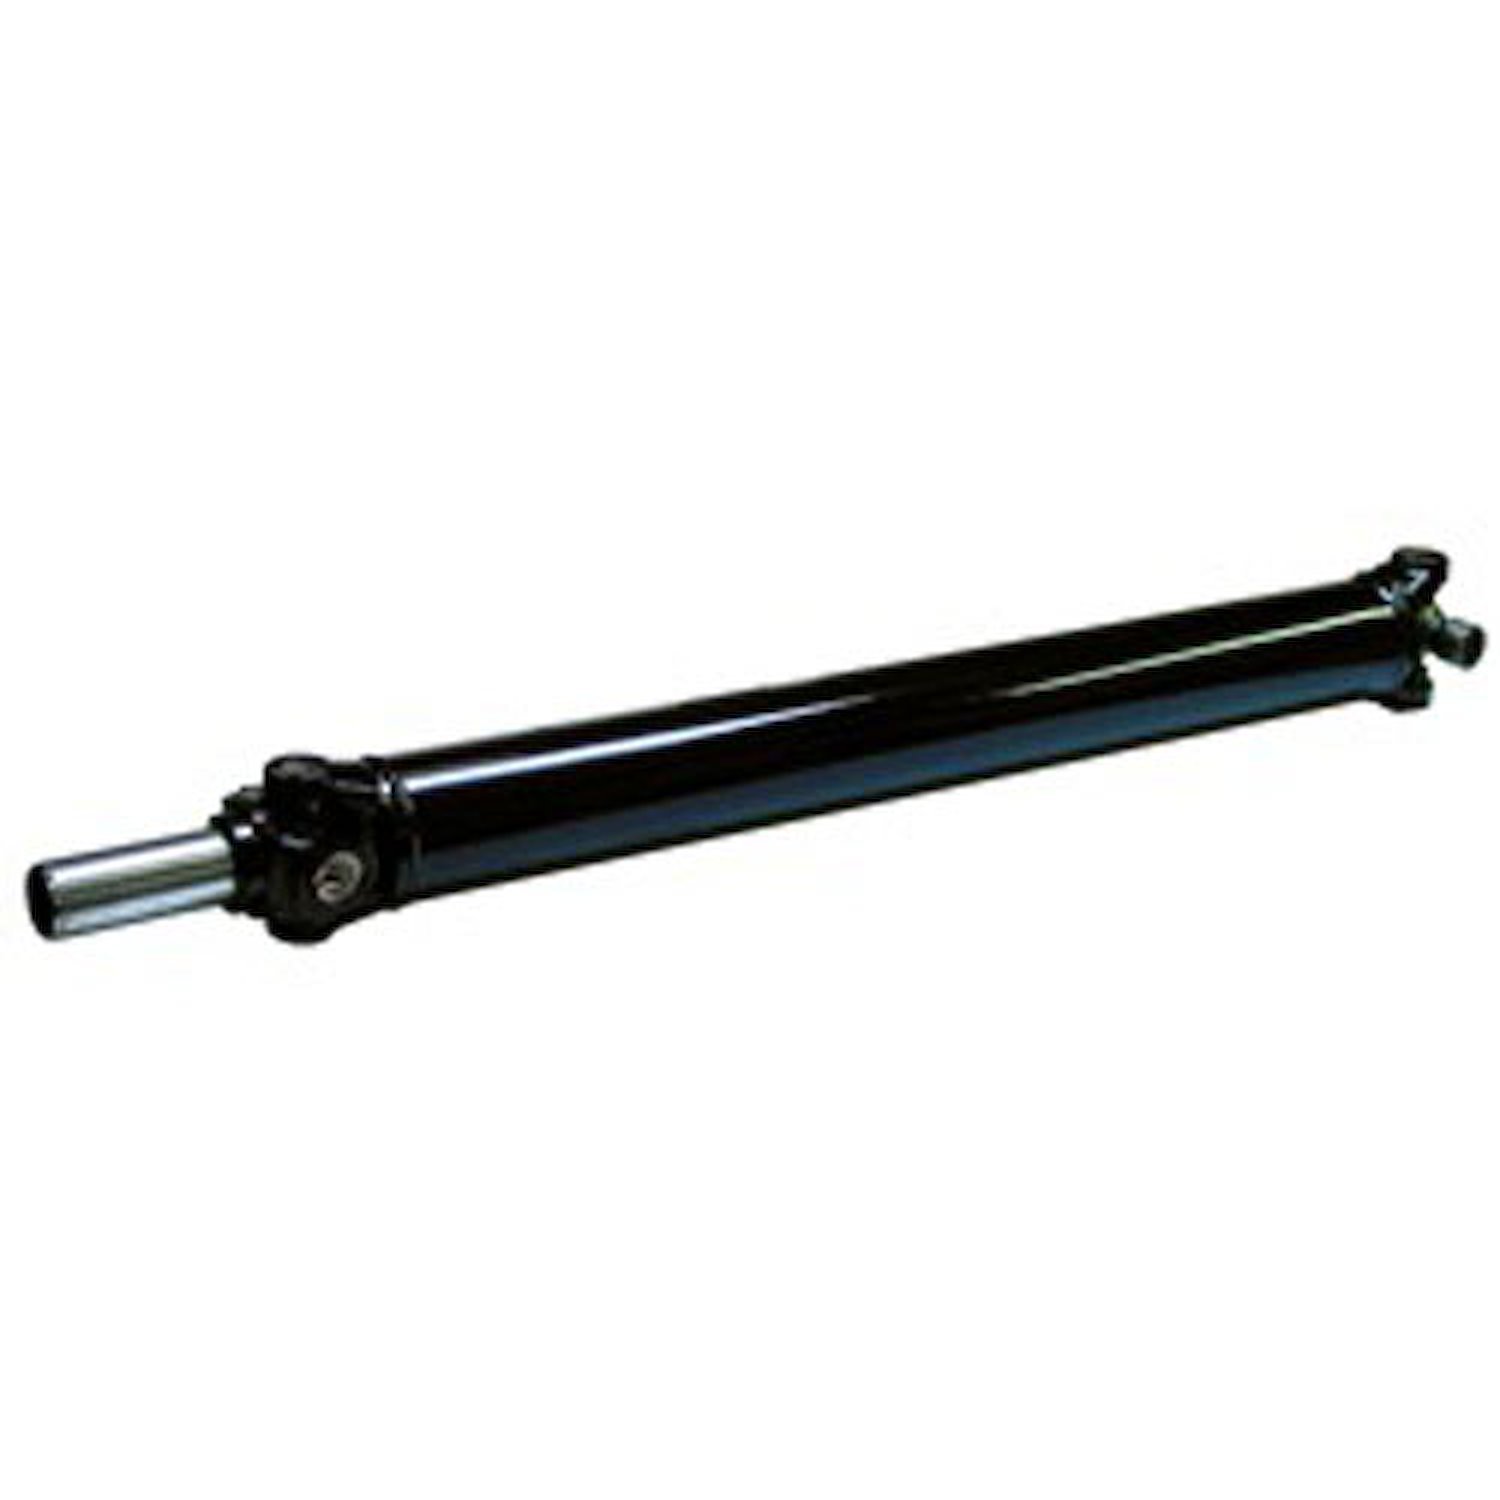 Complete Stock Replacement Steel Driveshaft